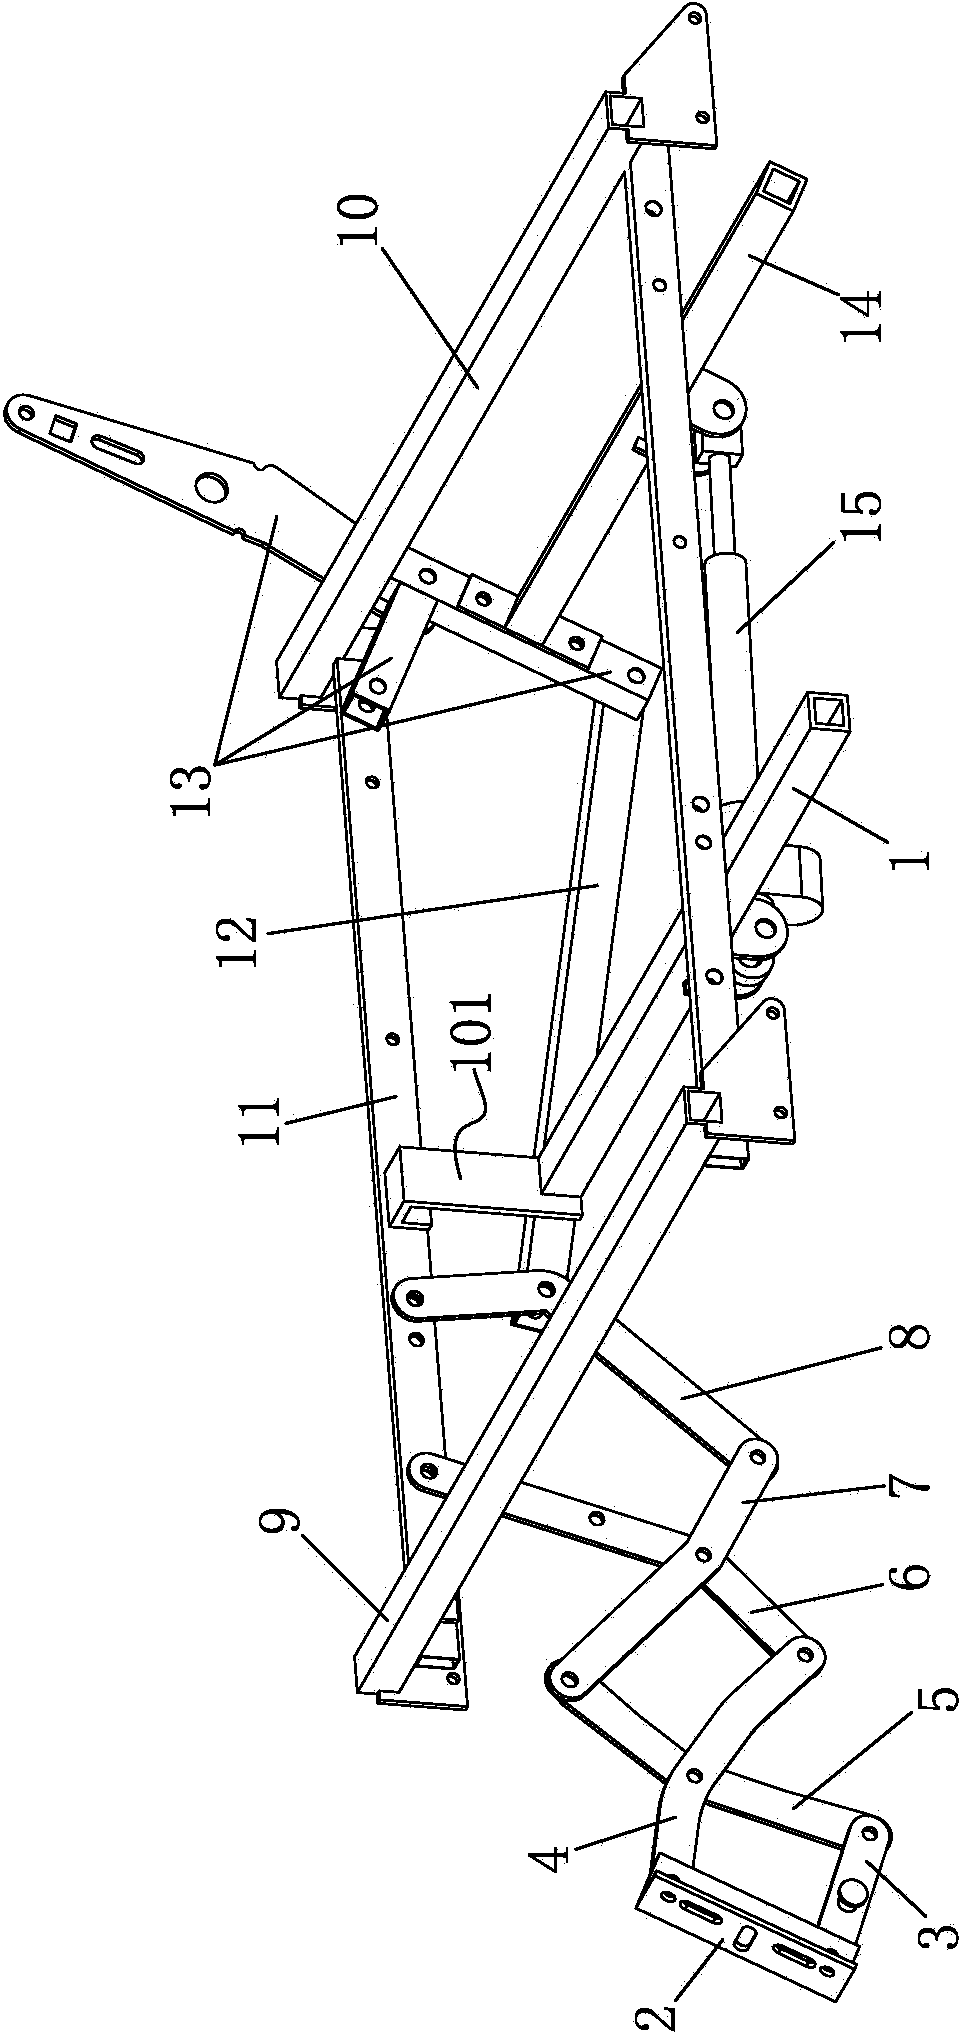 Seat and functional frame thereof